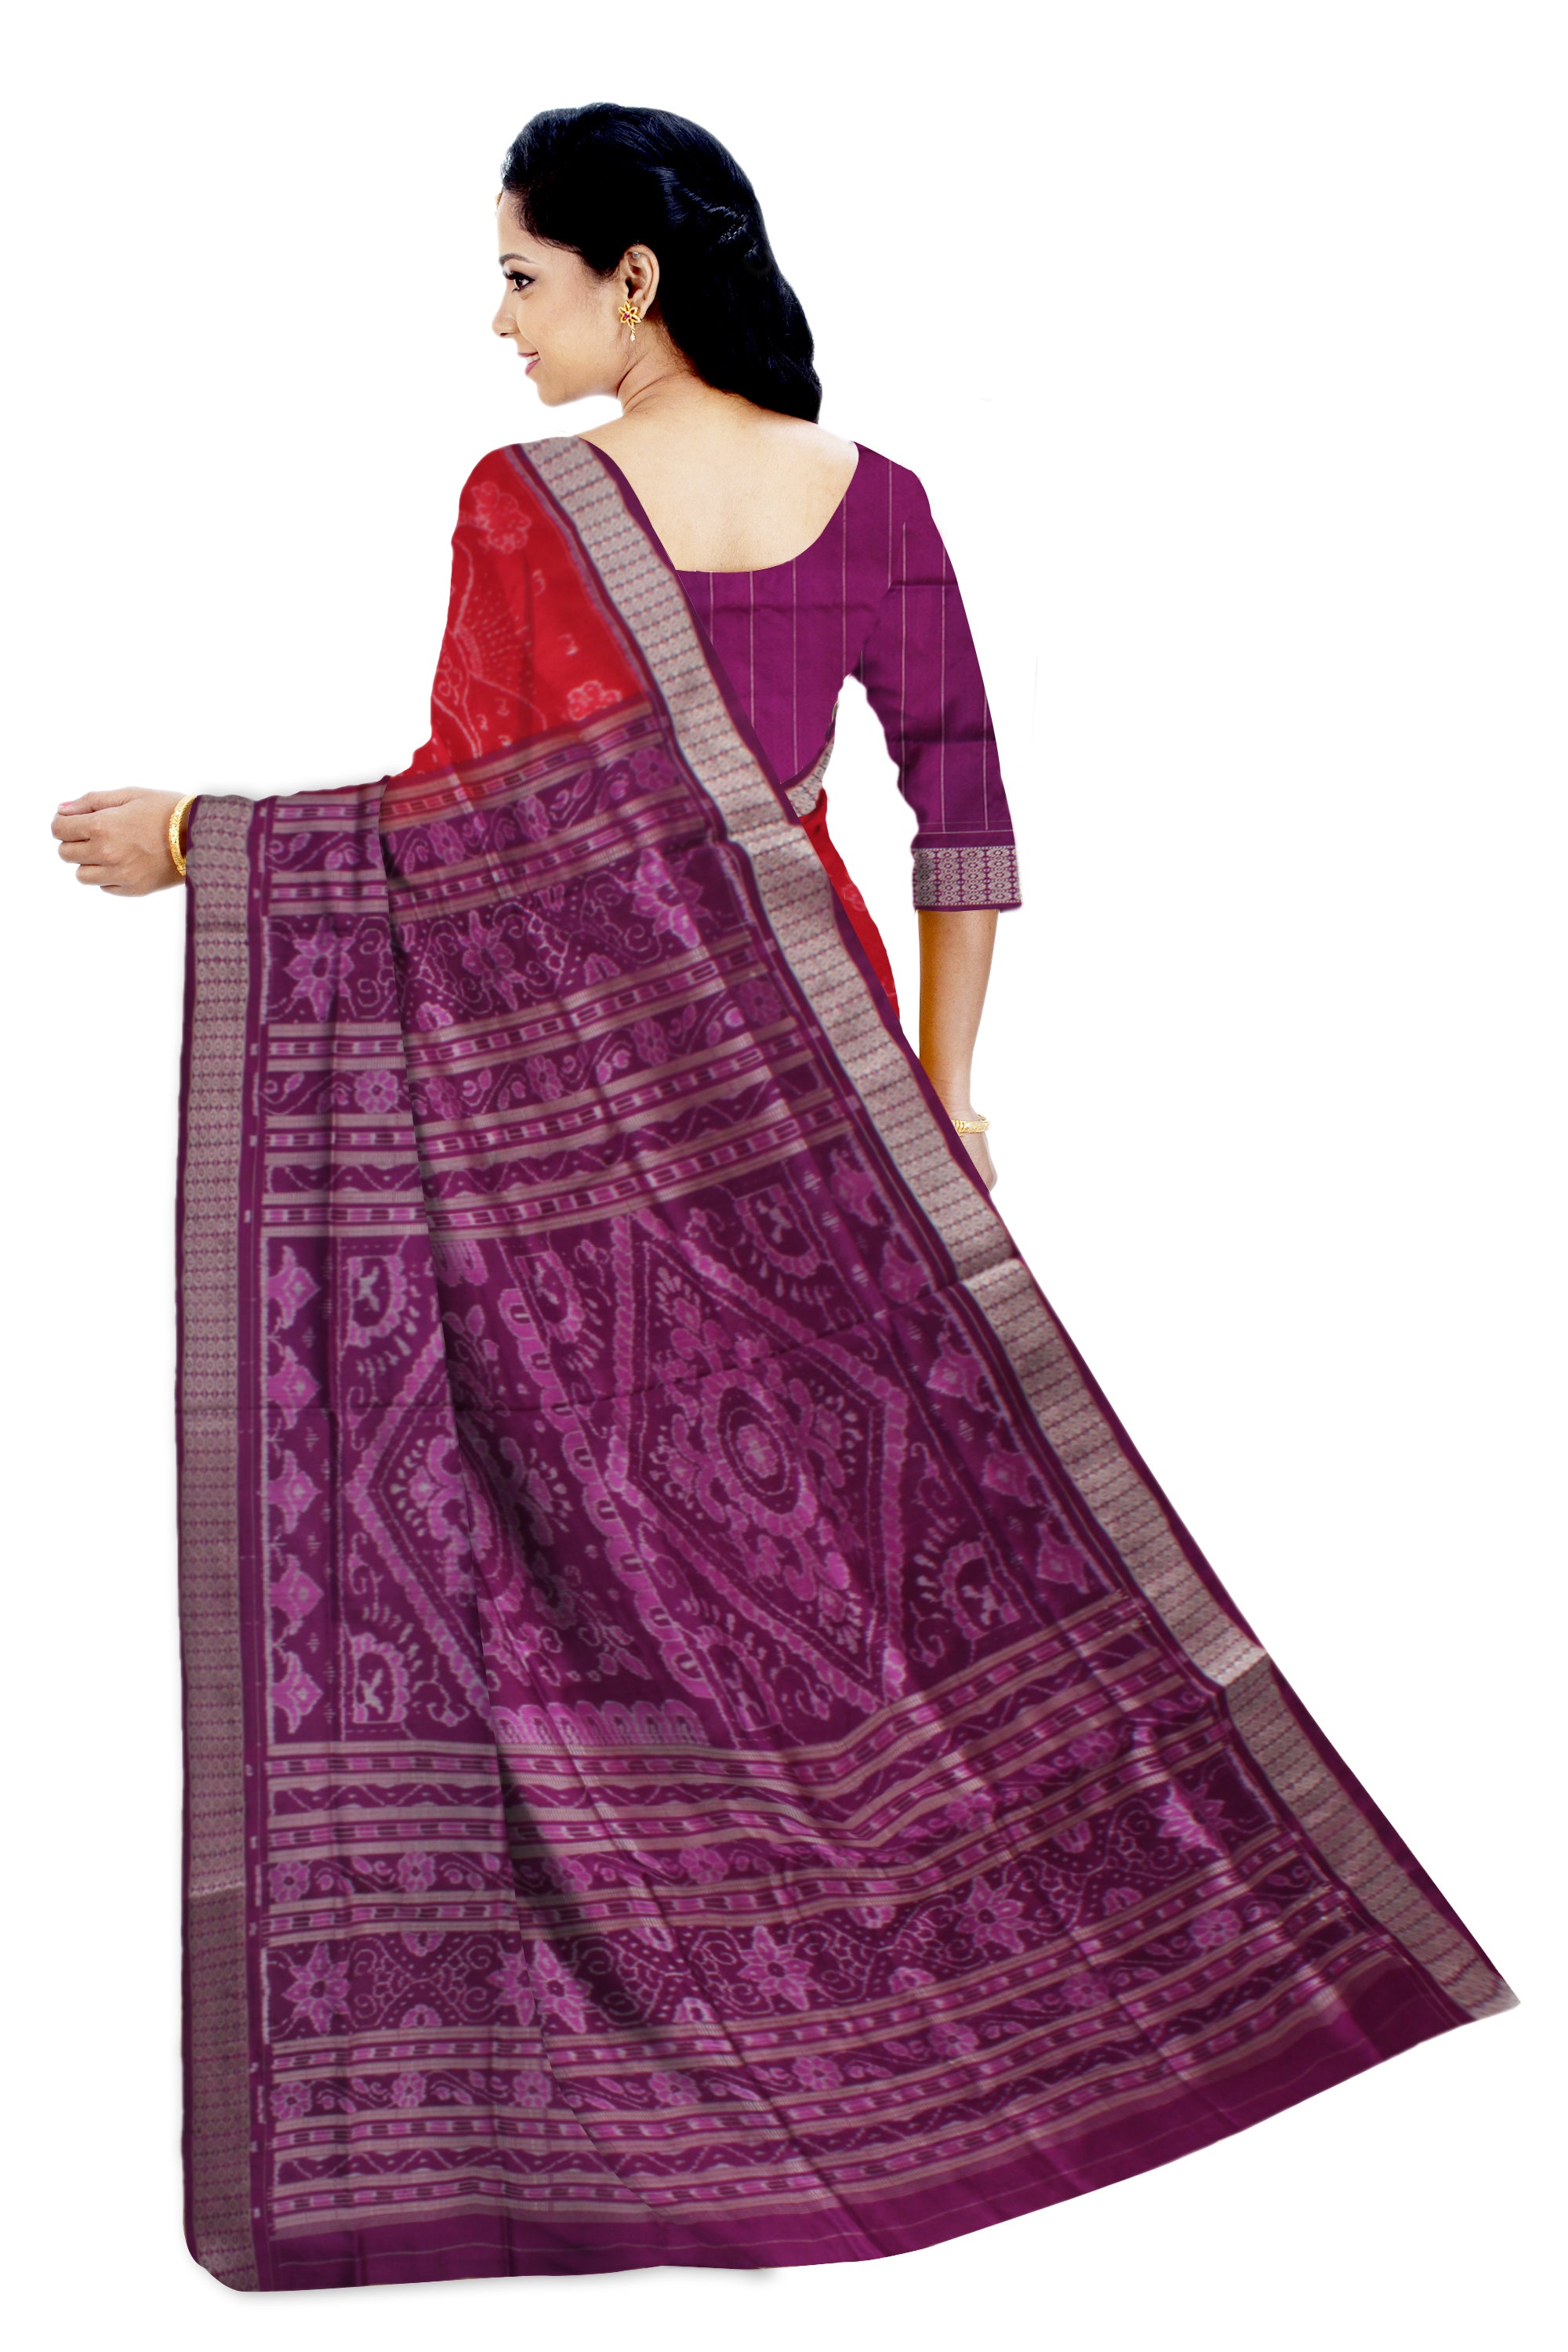 MOST BEAUTIFUL SUNSHINE VILLAGE PATTERN WORKING BODY PURE SILK SAREE IS RED AND PURPLE COLOR BASE.ATTACHED WITH MATCHING BLOUSE PIECE. - Koshali Arts & Crafts Enterprise